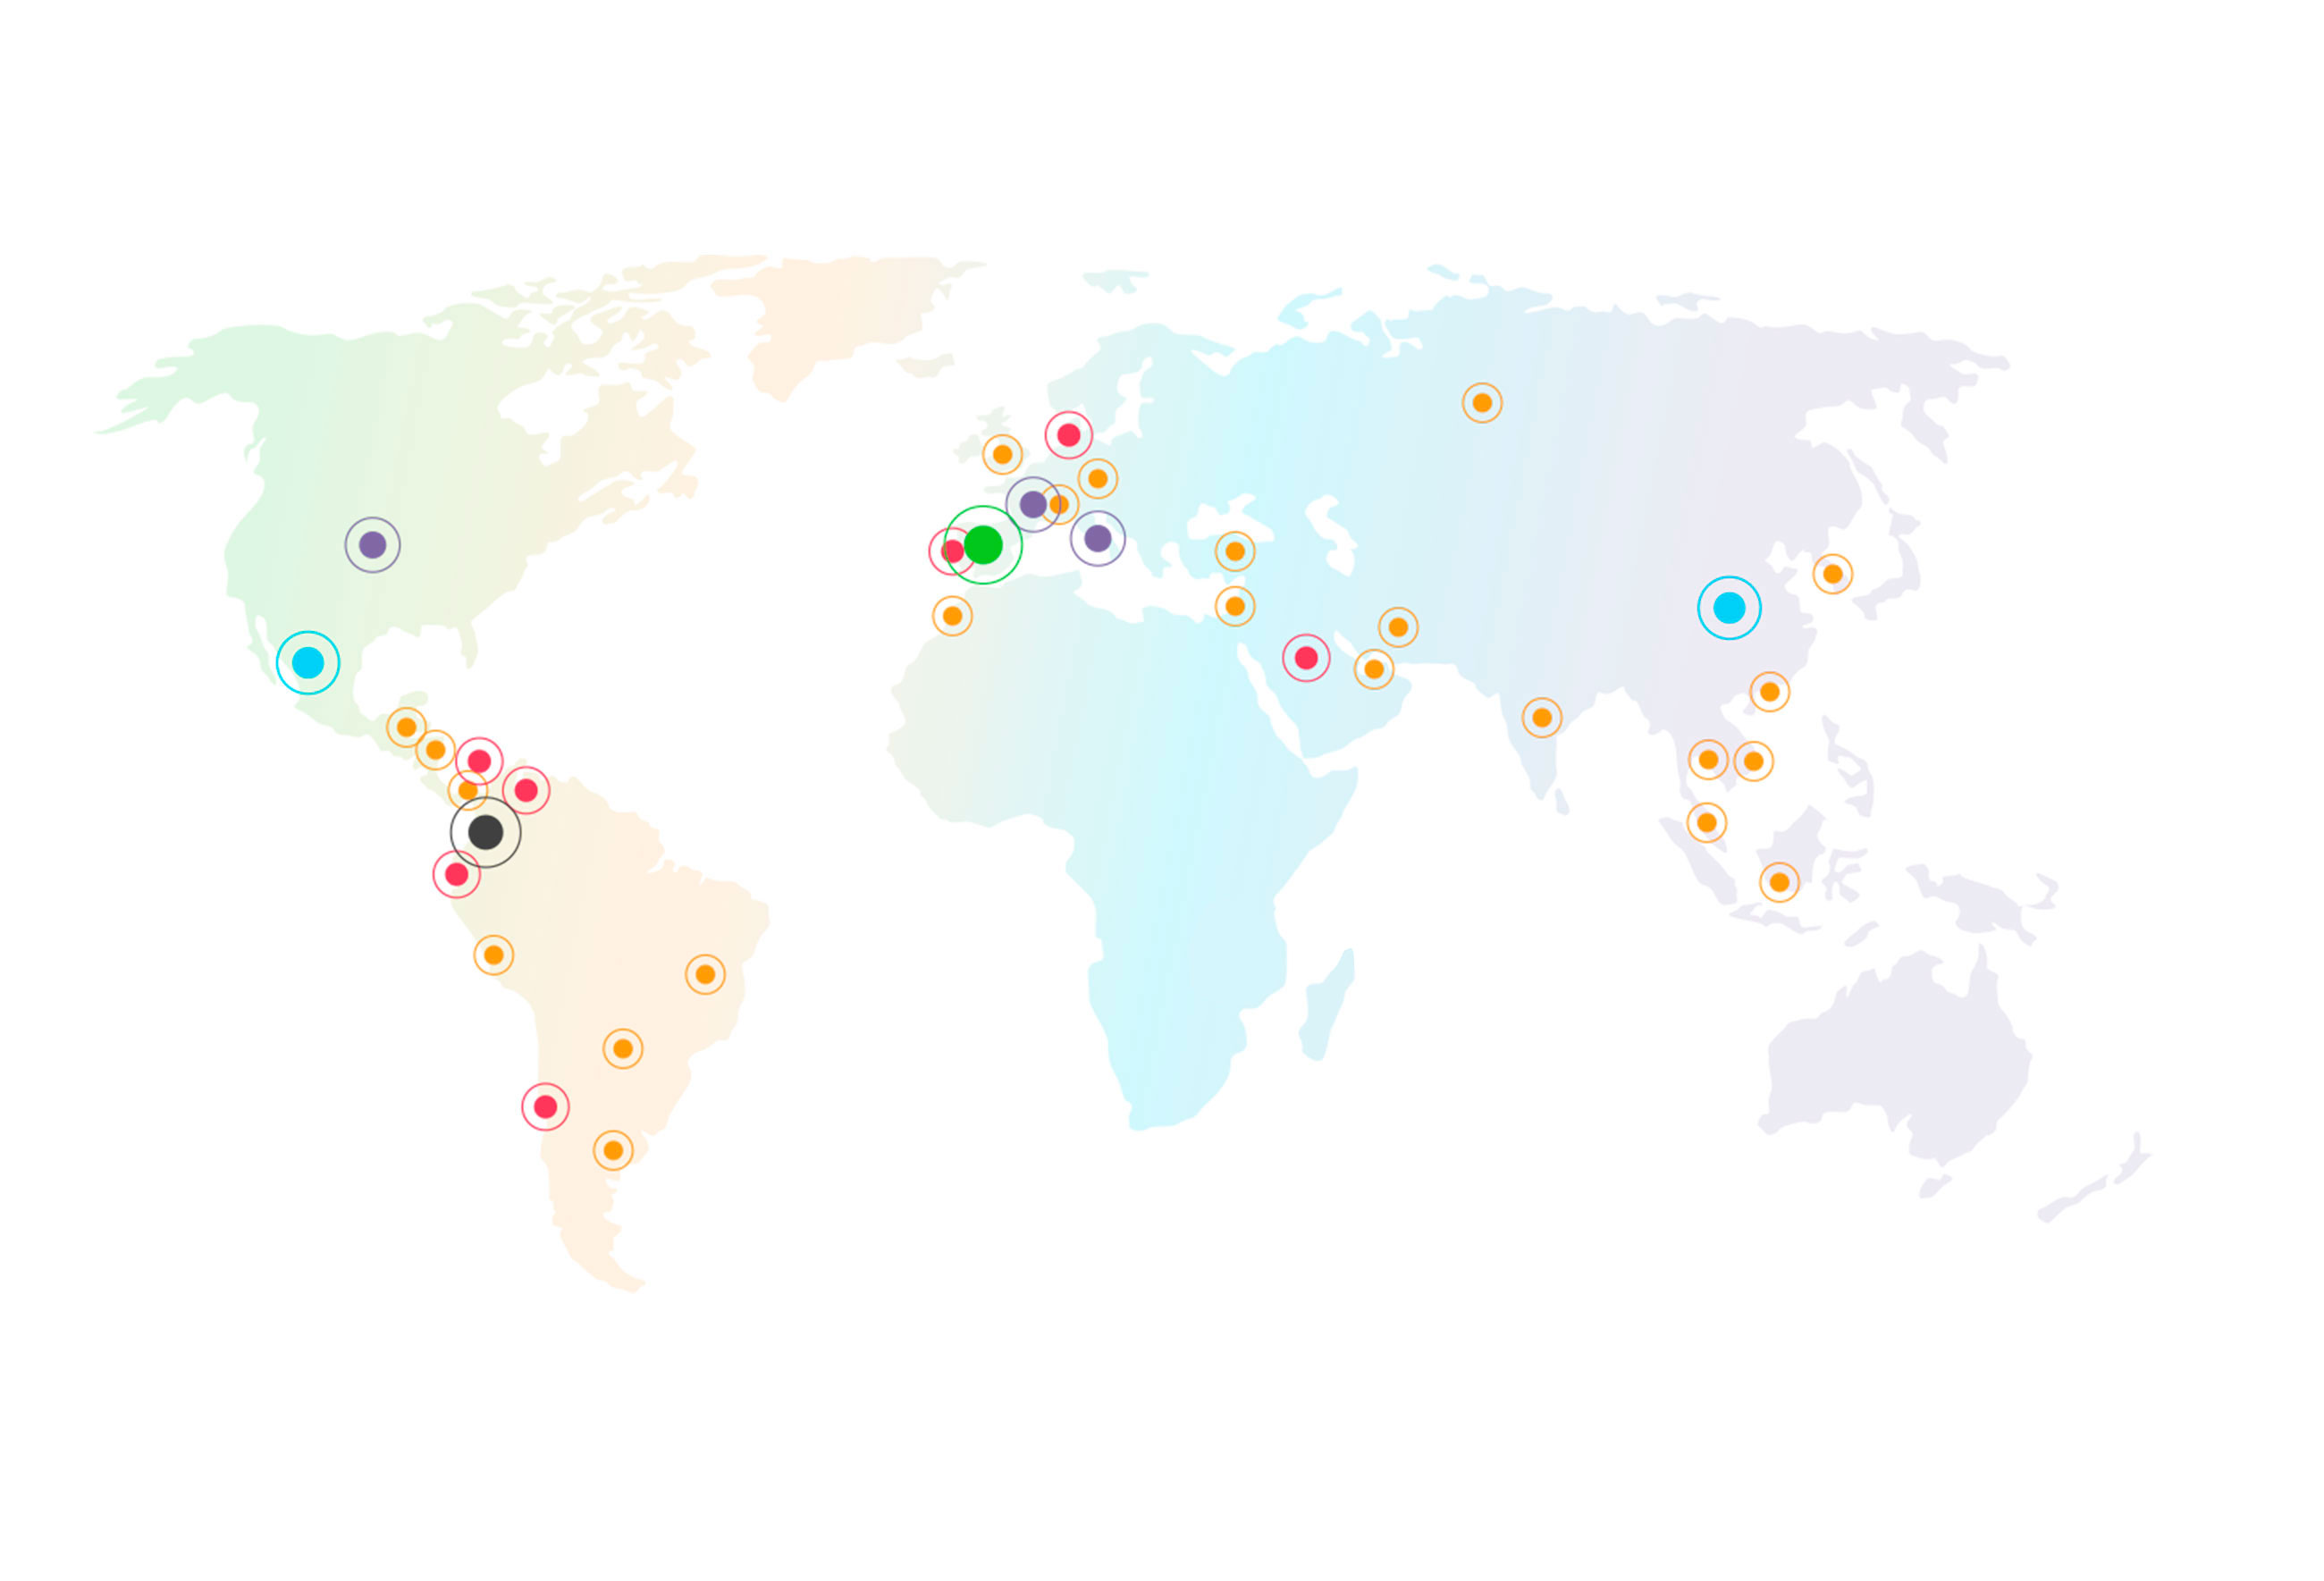 BlinkLearning is present in over 10,000 educational centers across 42 countries